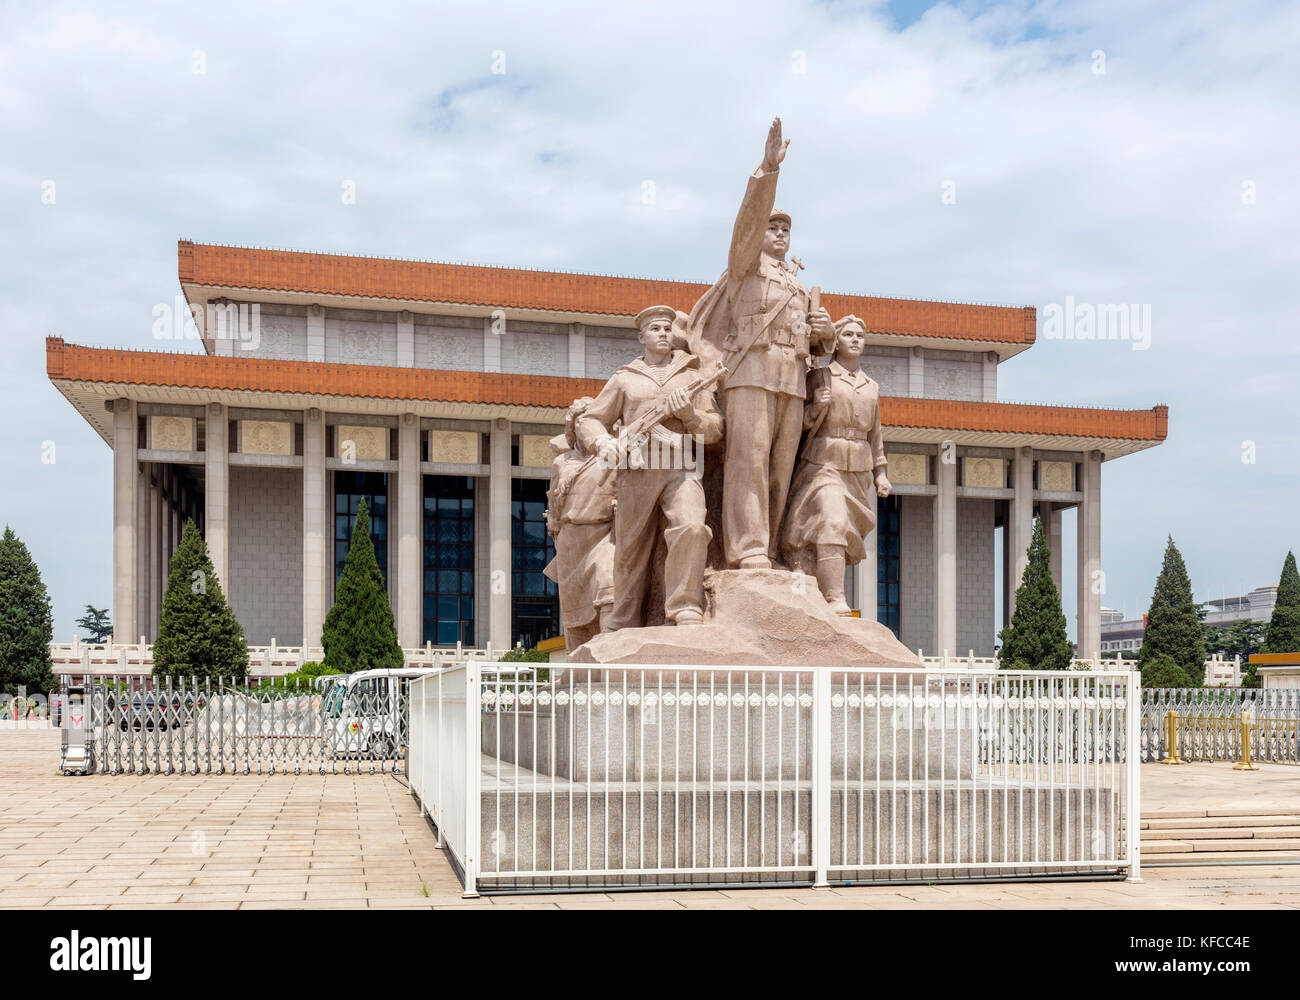 Mausoleum of Mao Zedong on Tiananmen Square, a city square in the centre of Beijing, China. Stock Photo